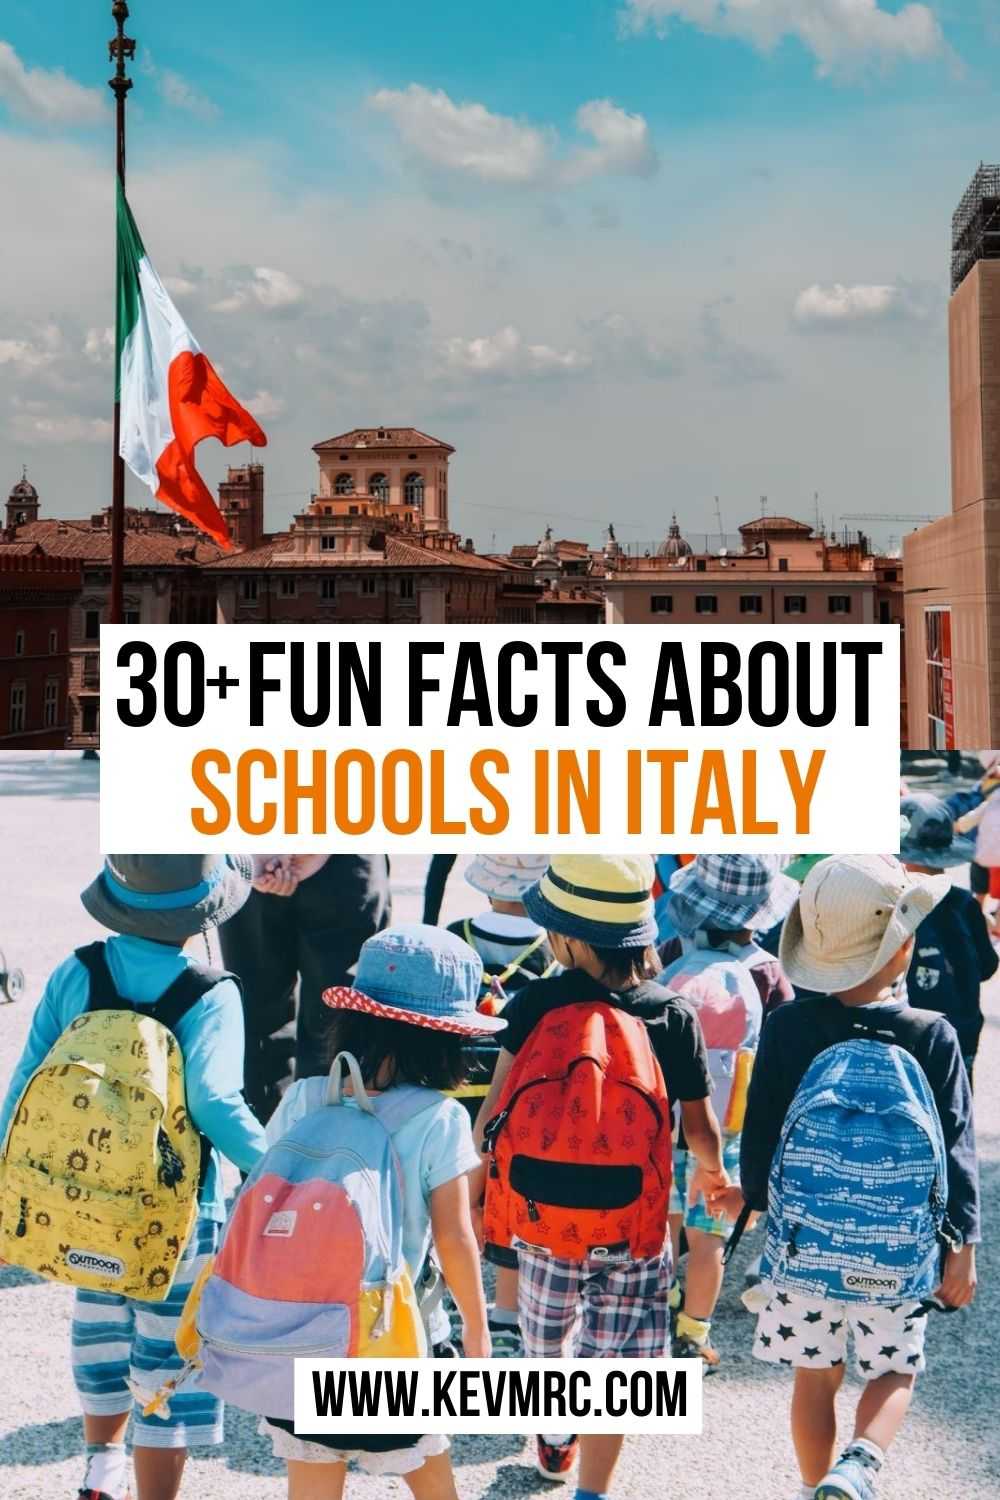 Did you know that Italians graduate quite late compared to other countries? Or that Italian kids don't wear uniforms? Learn more through these 33 Italy education facts! italy facts | things to know about italy | italy schools